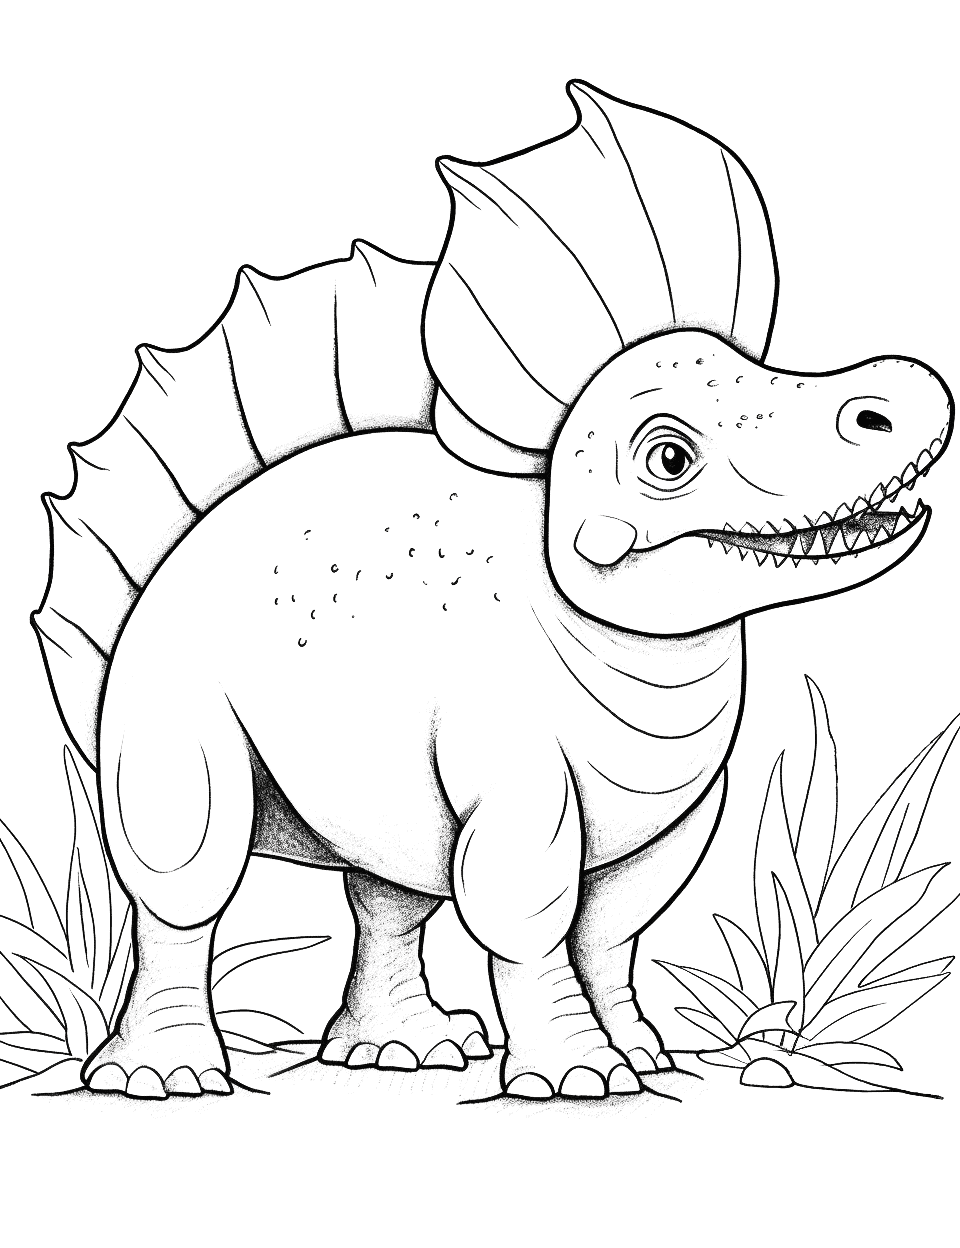 Realistic Triceratops Dinosaur Coloring Page - A realistic and detailed Triceratops for older kids to color.